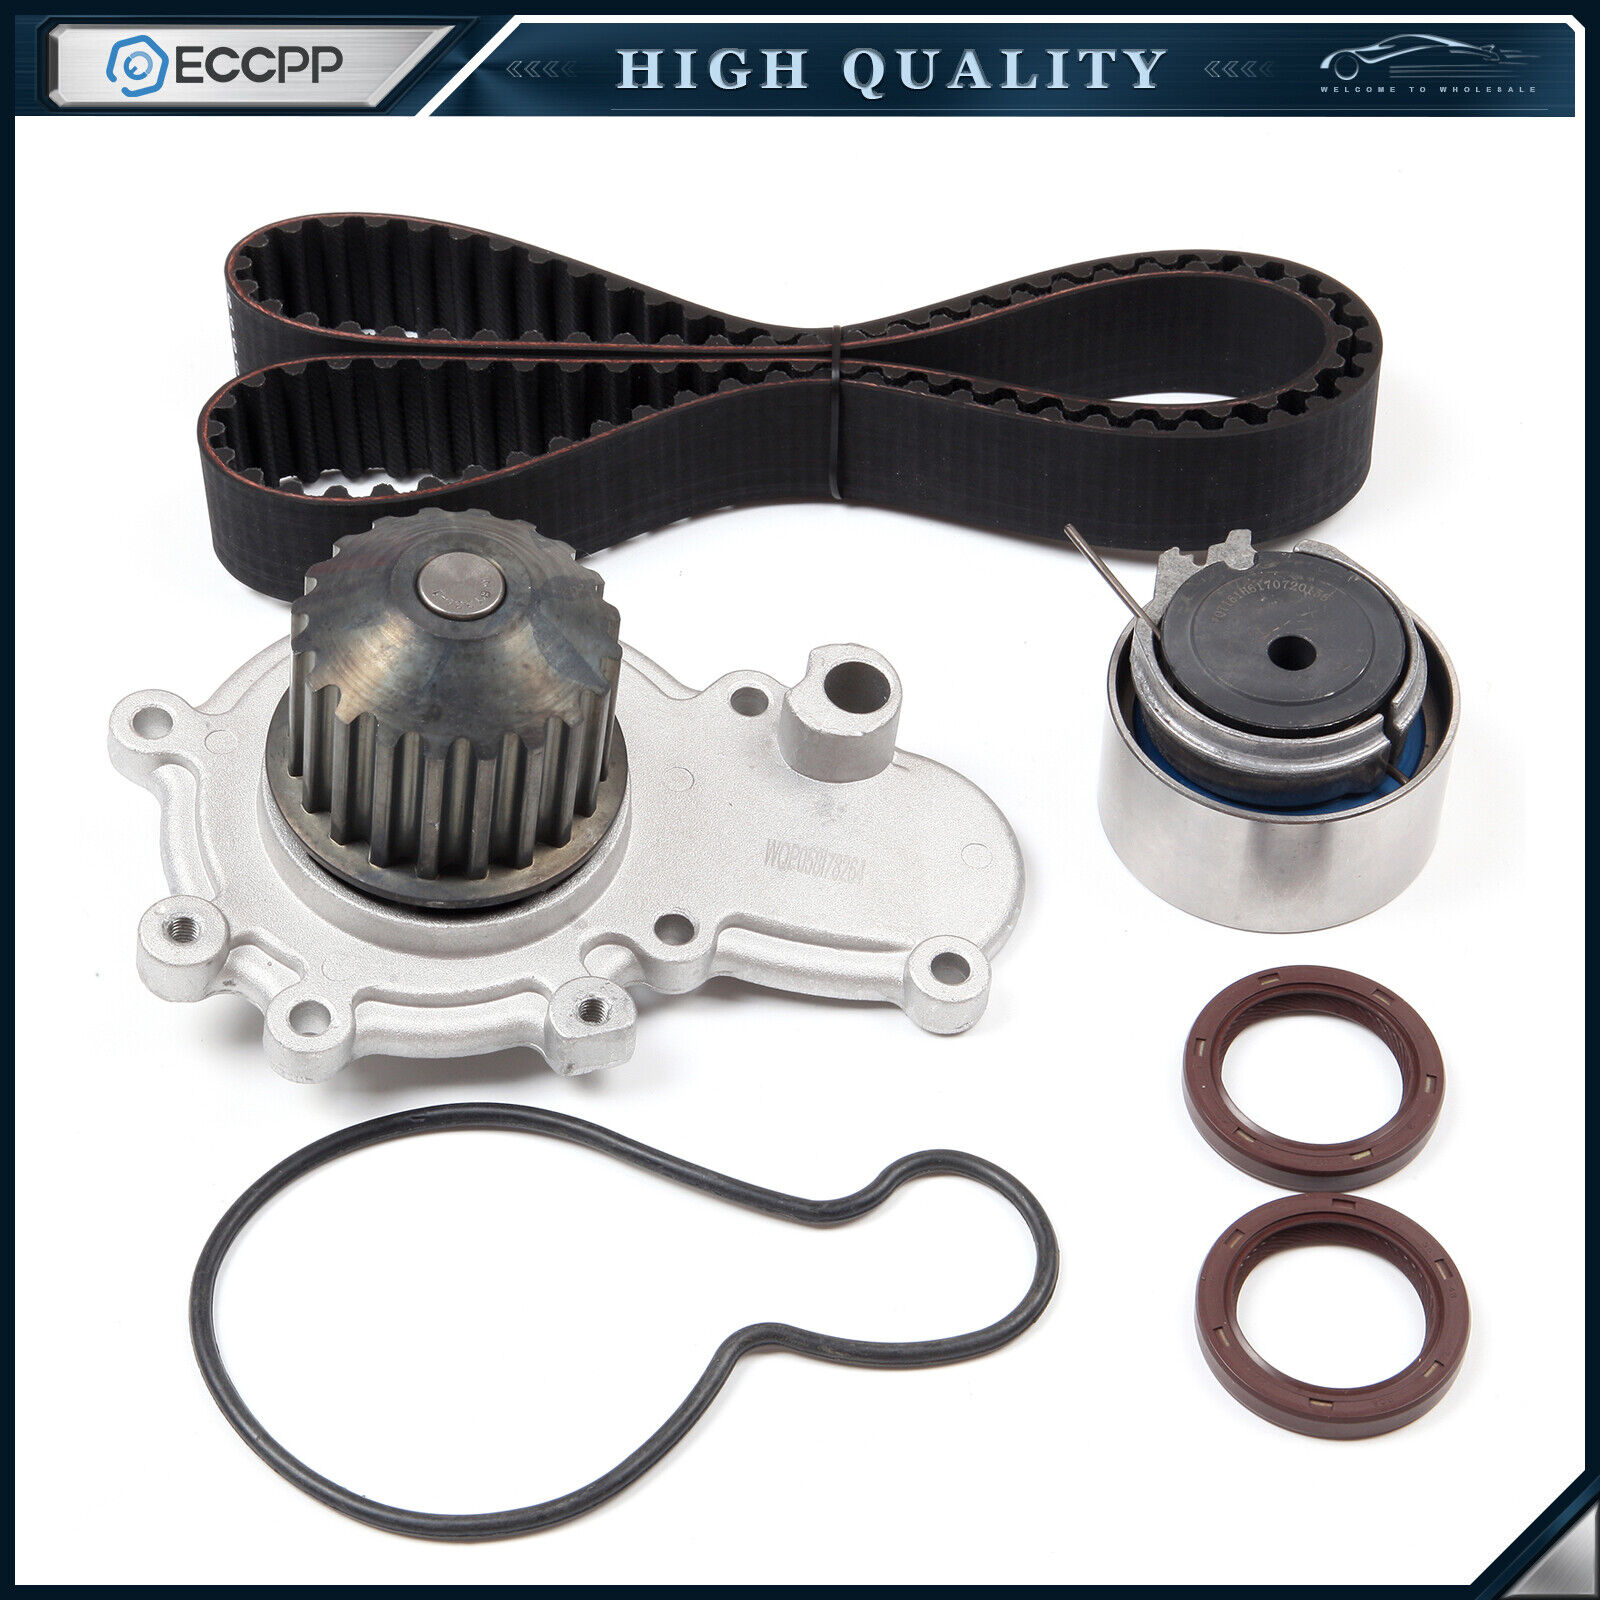 Timing Belt Water Pump Kit For 95-05 Dodge Stratus Neon Plymouth 16v 2.0L SOHC